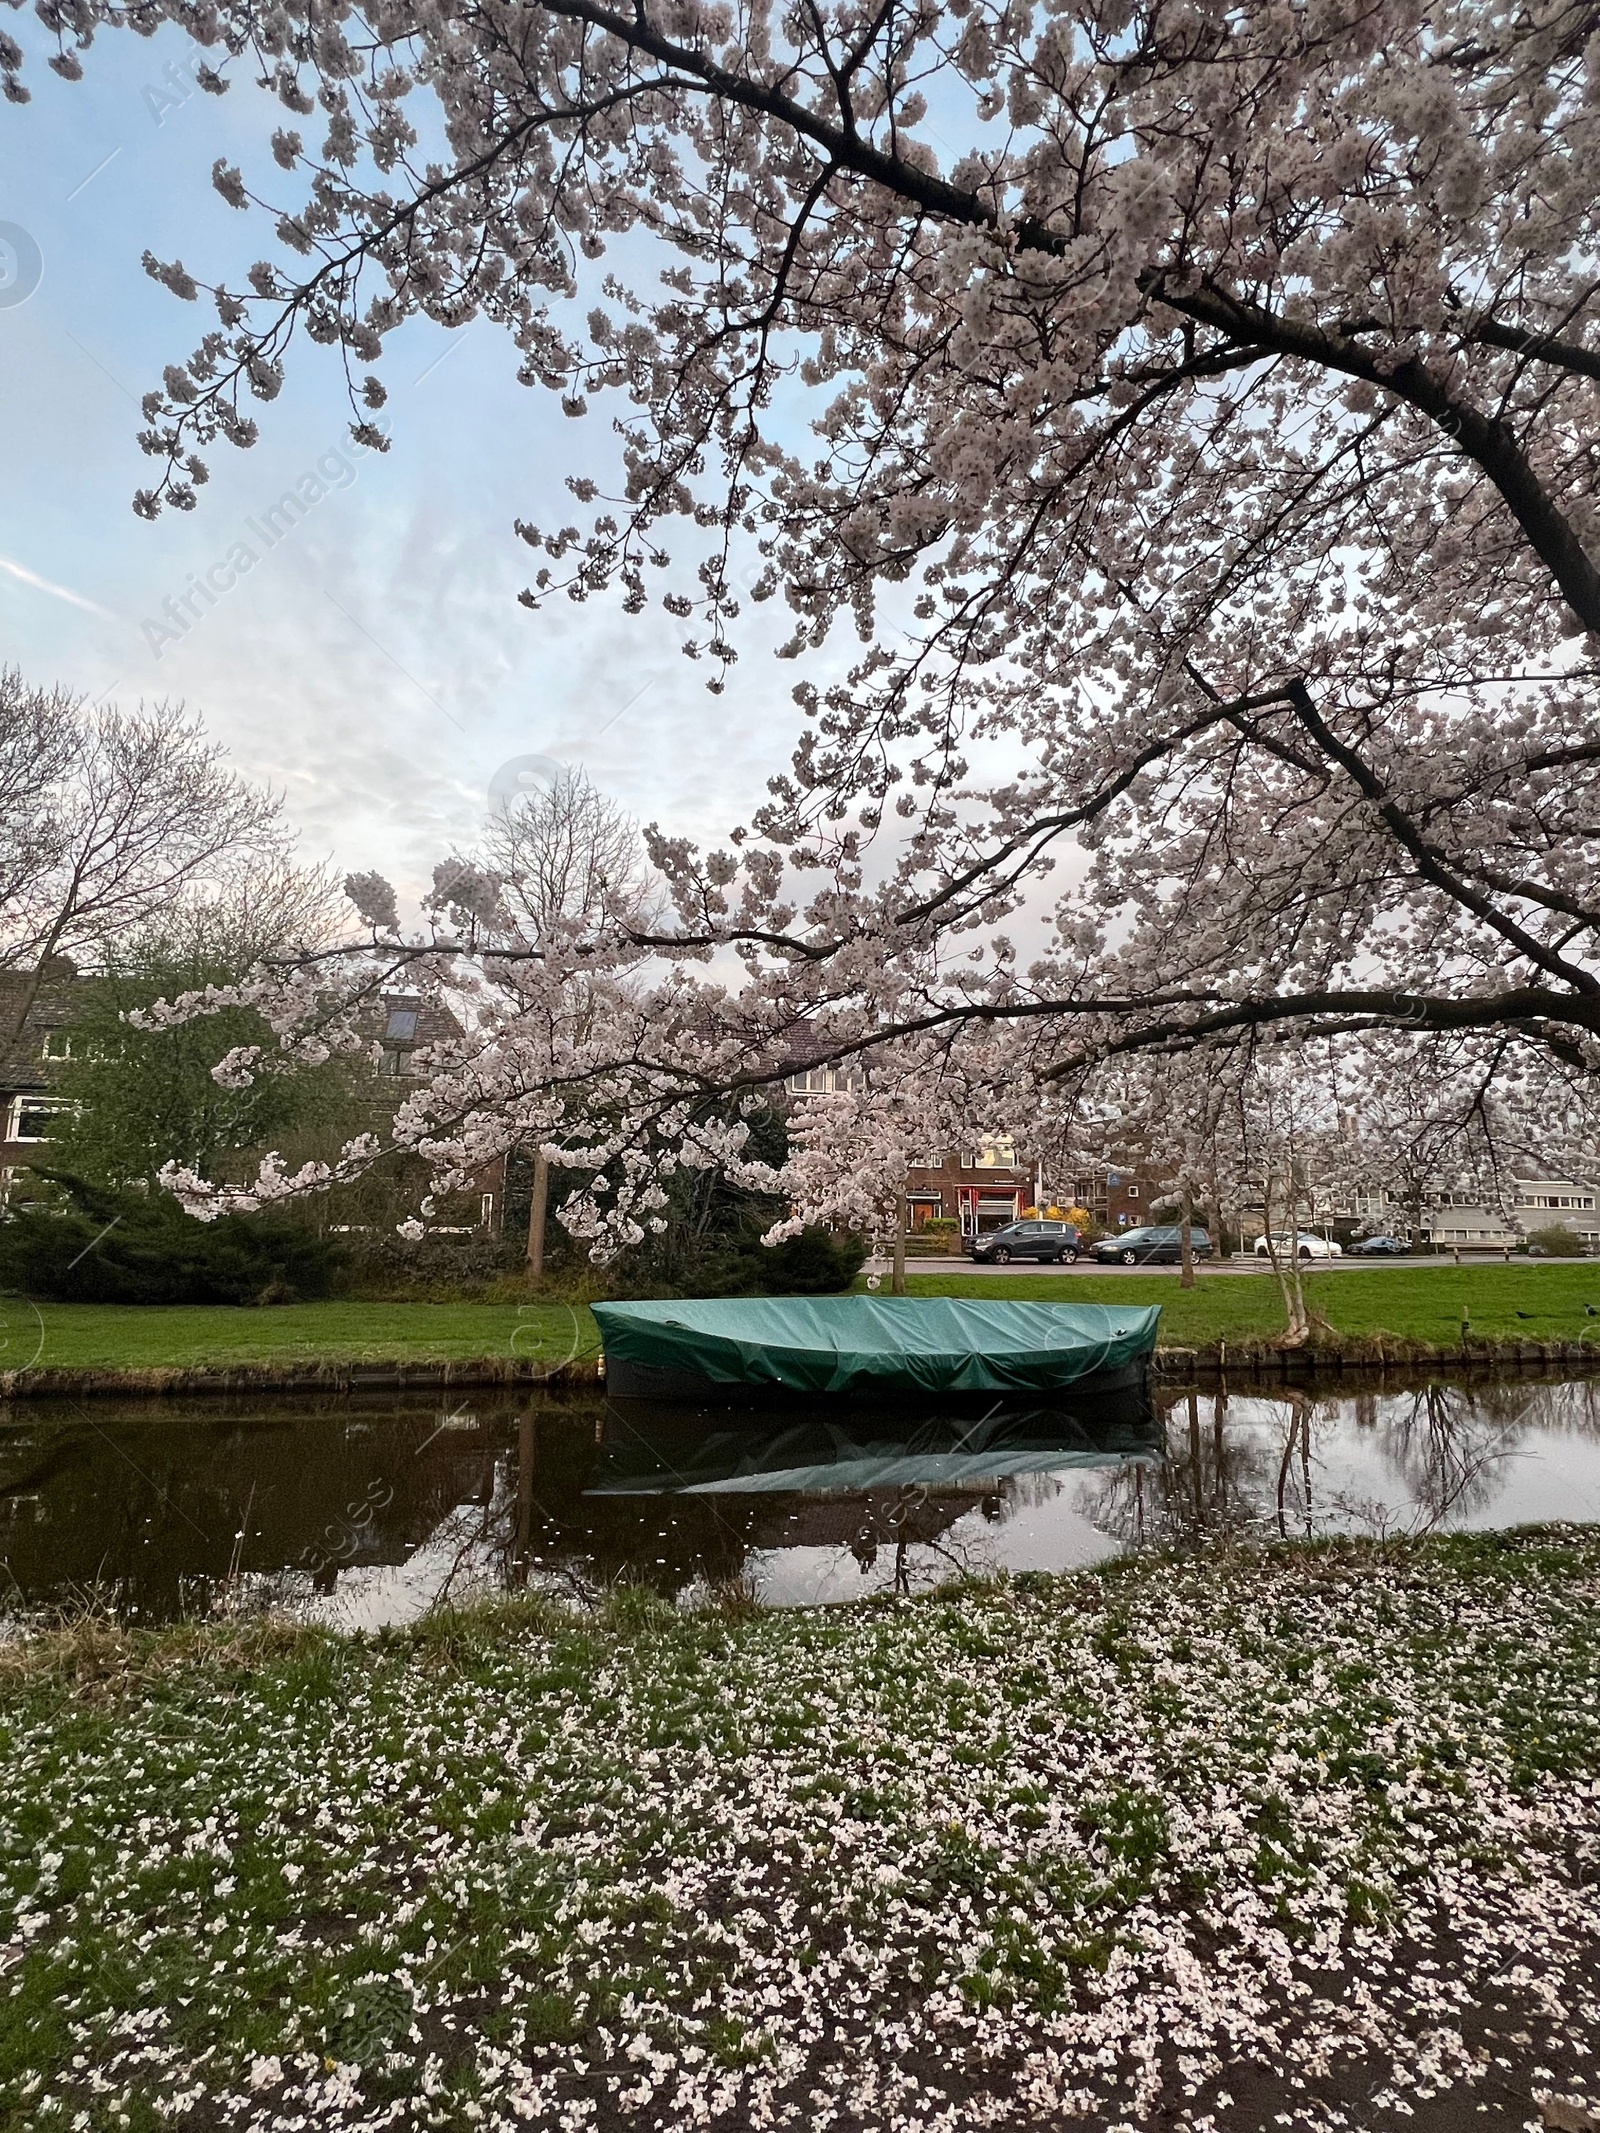 Photo of Picturesque view of canal with moored boat and blossoming tree in spring